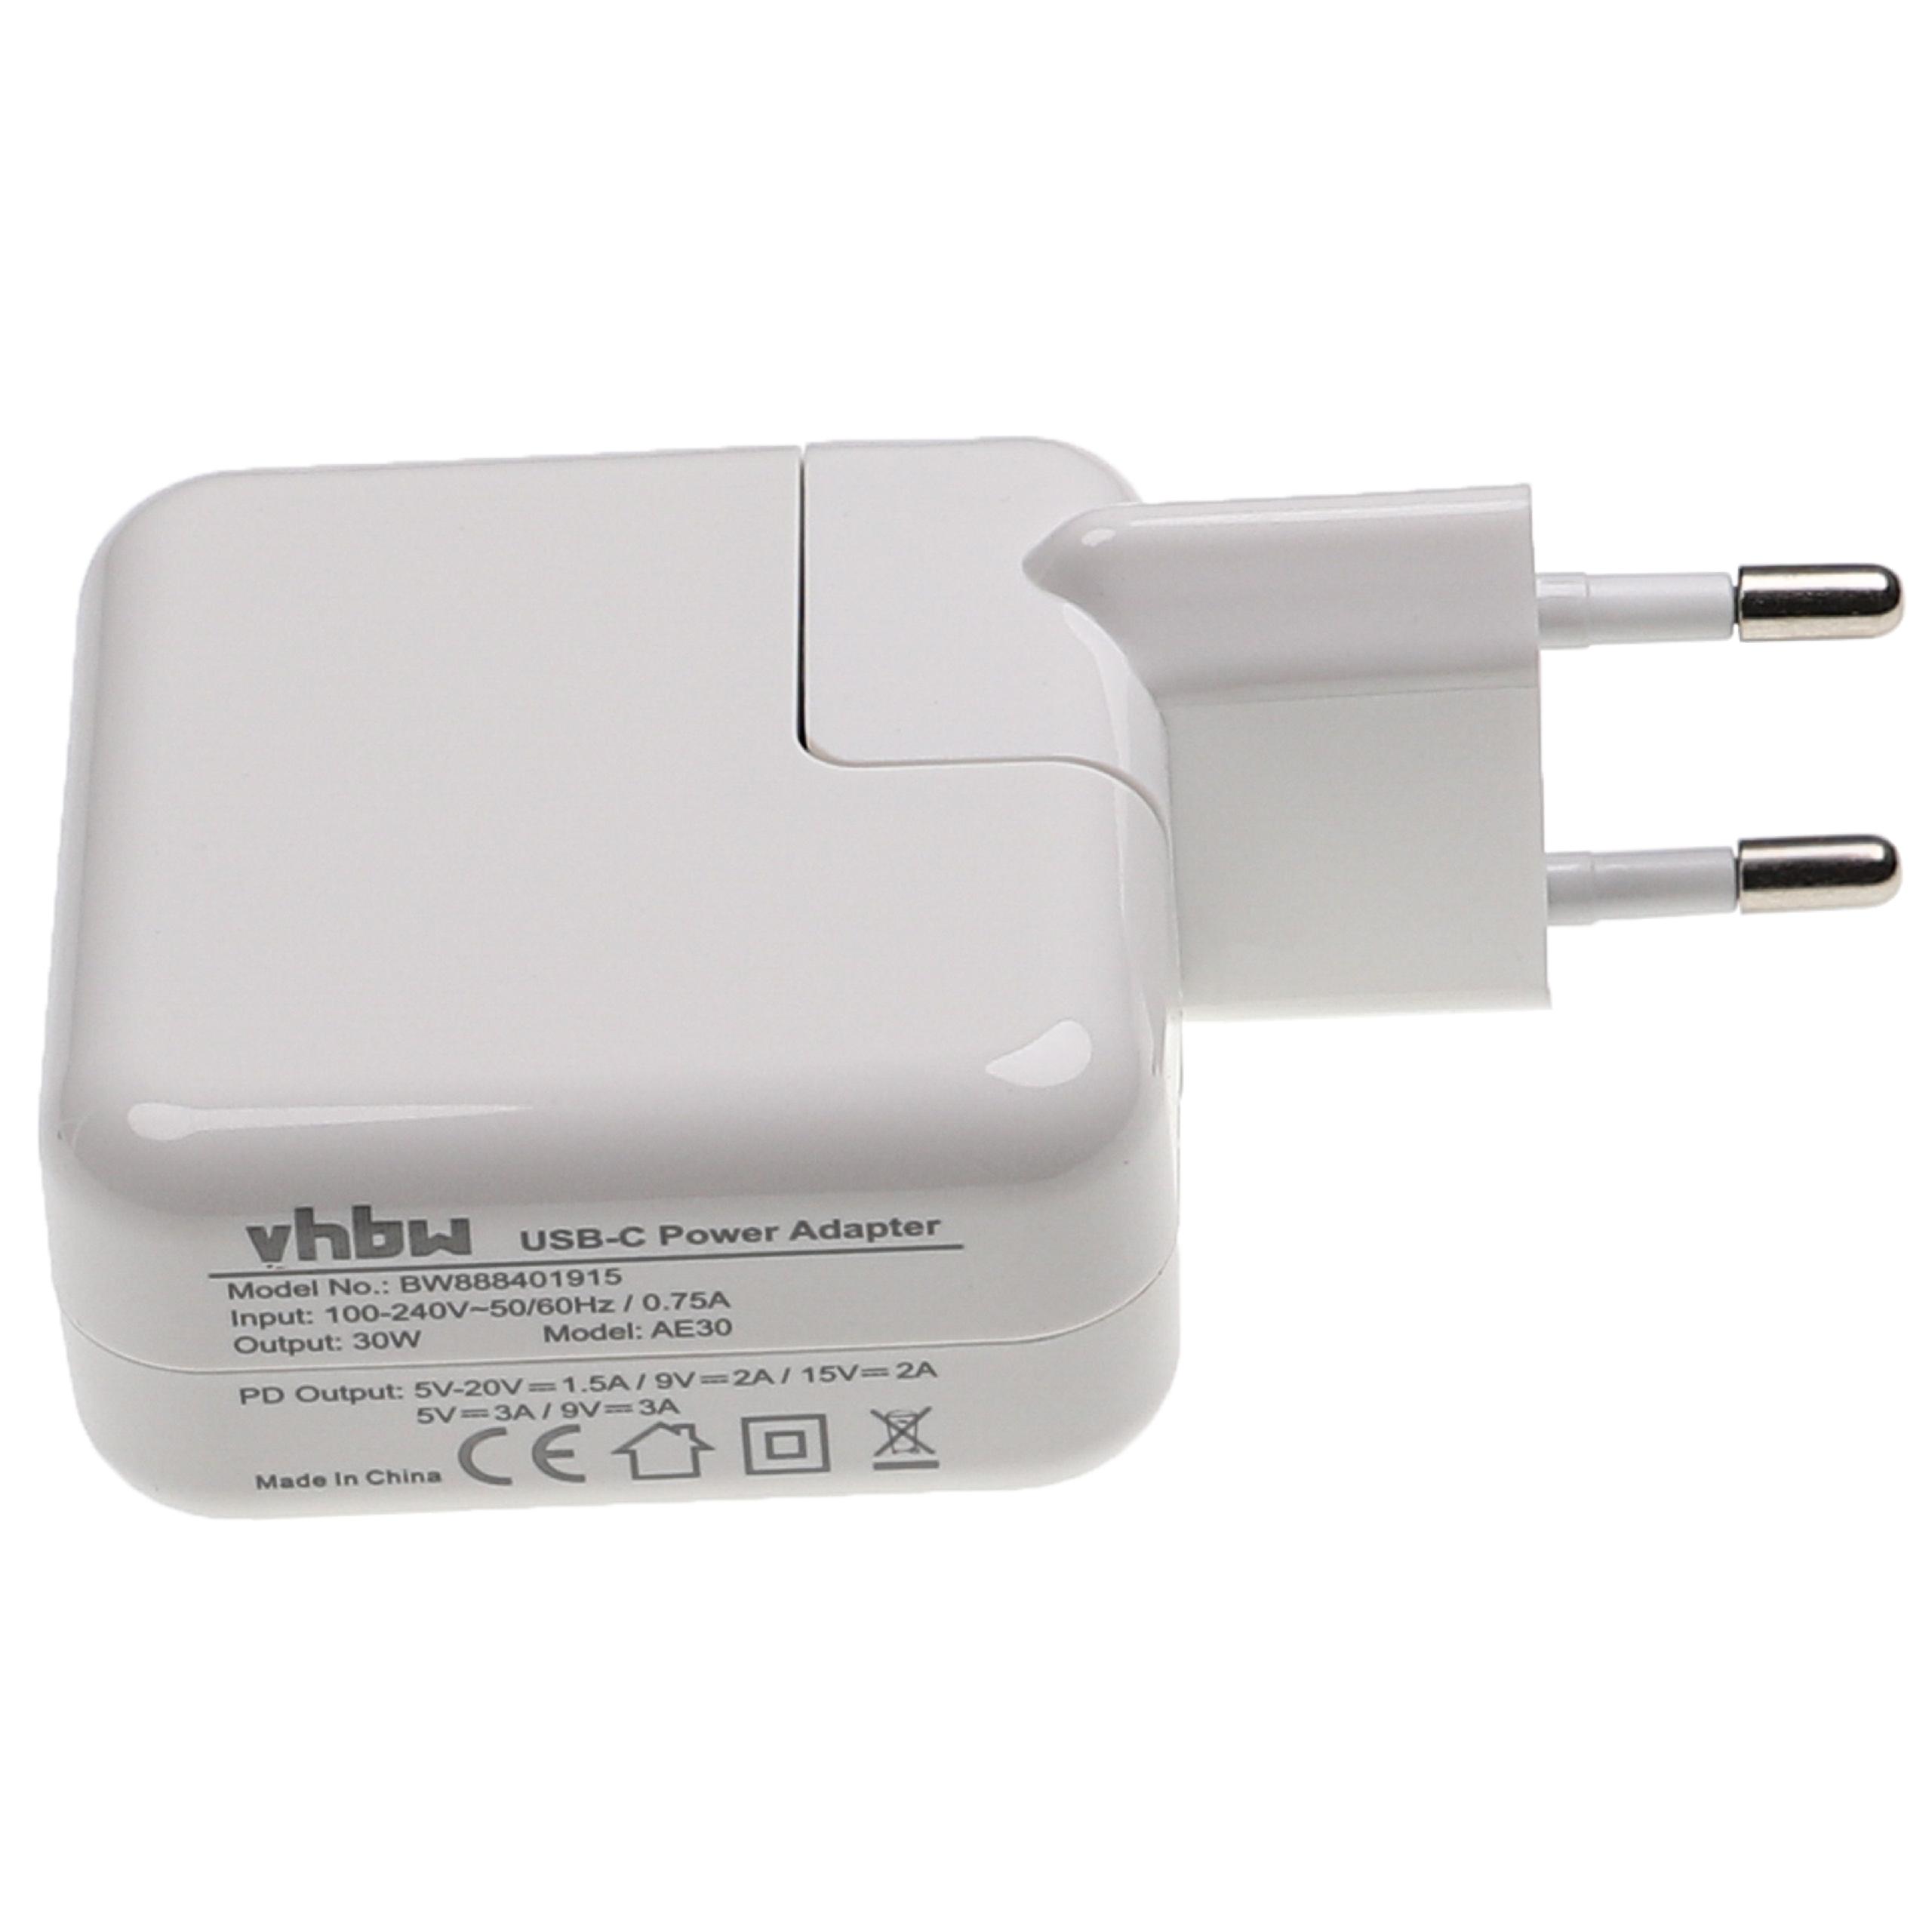 USB C USB Power Adapter for Smartphones, Mobile Phones, Tablets - USB Chargers, 15 / 9 / 5 V Adapter